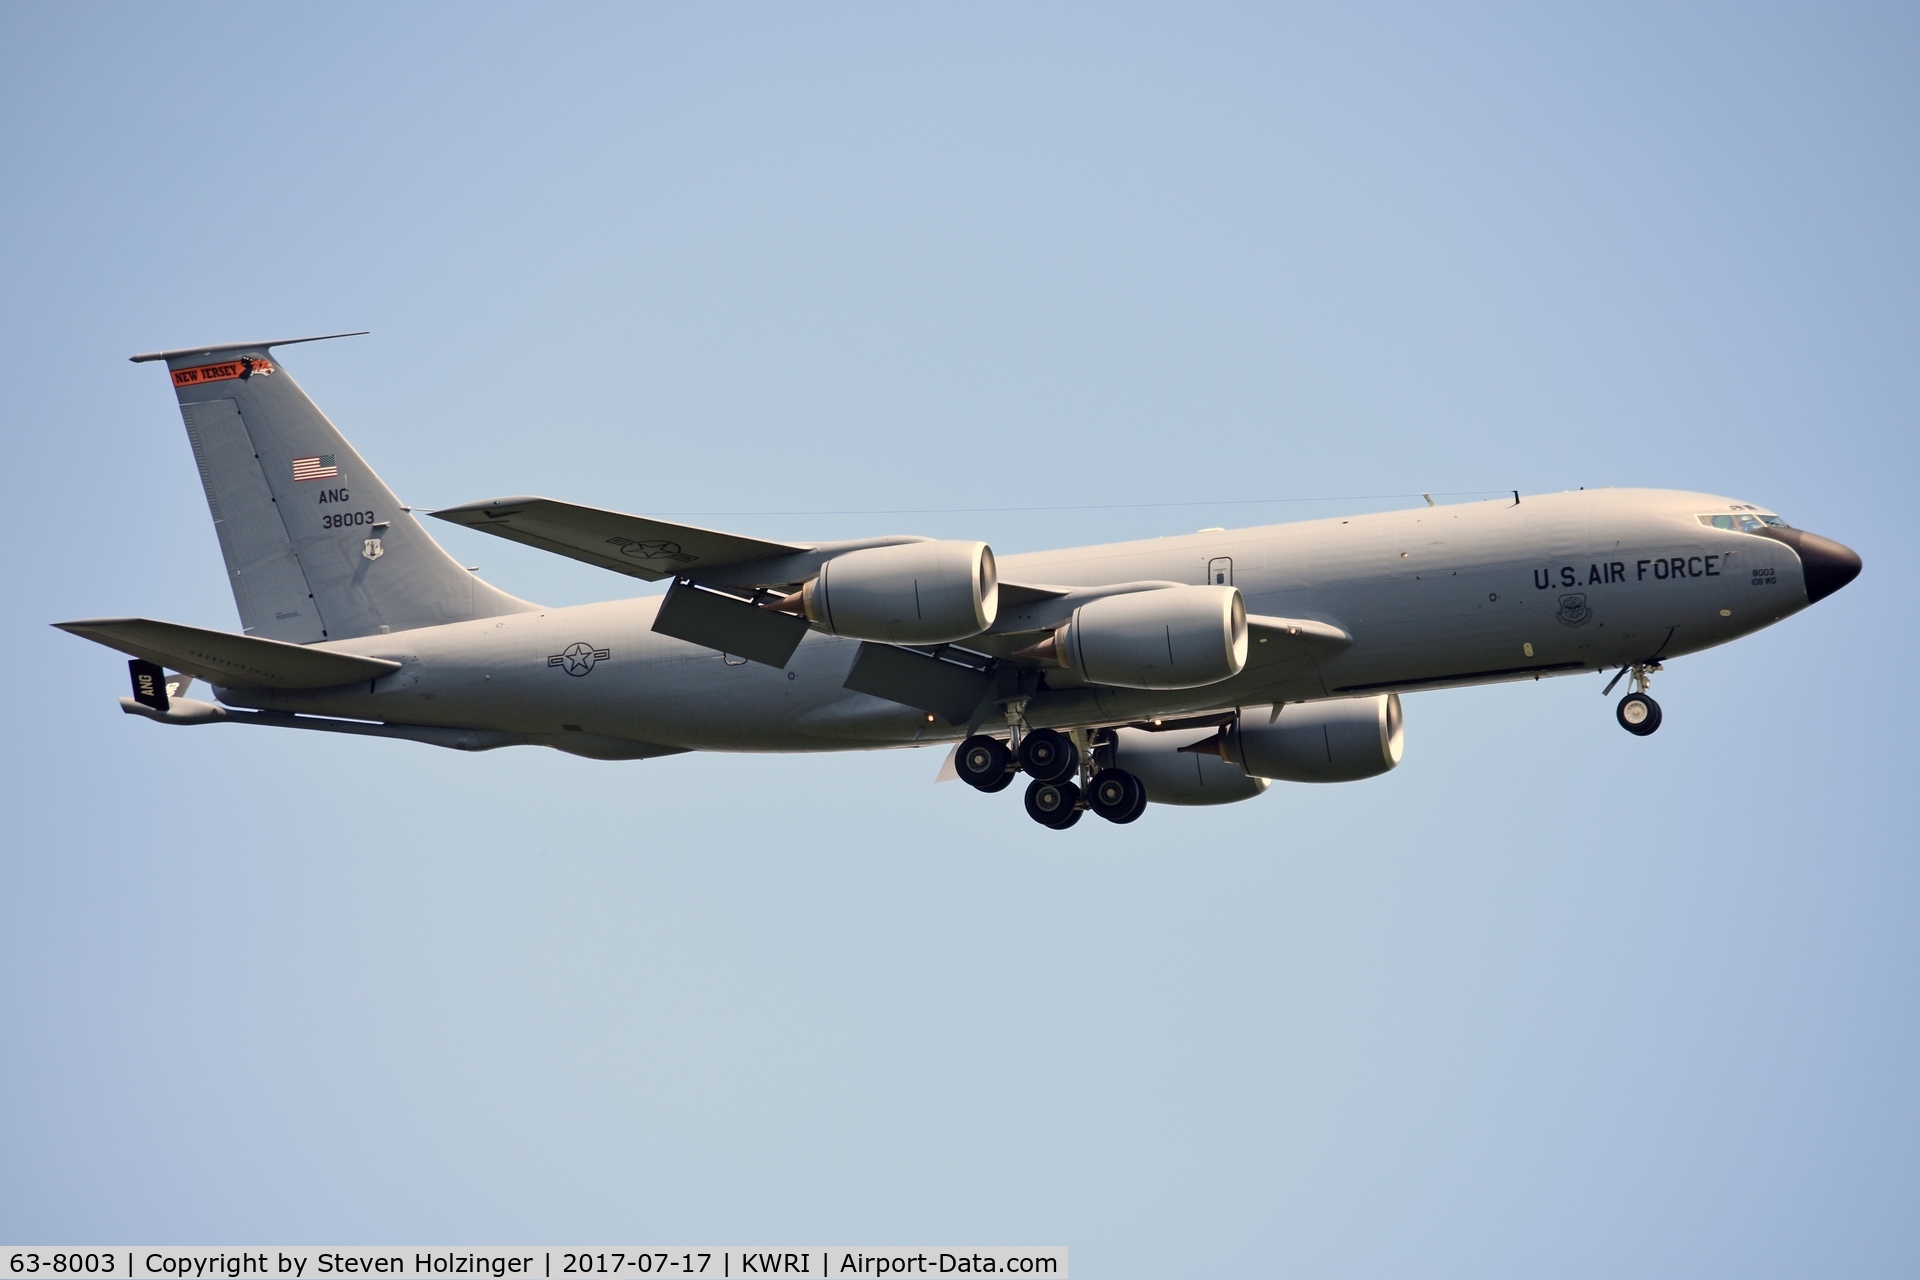 63-8003, 1963 Boeing KC-135R Stratotanker C/N 18620, On short final to McGuire after completing a training mission.